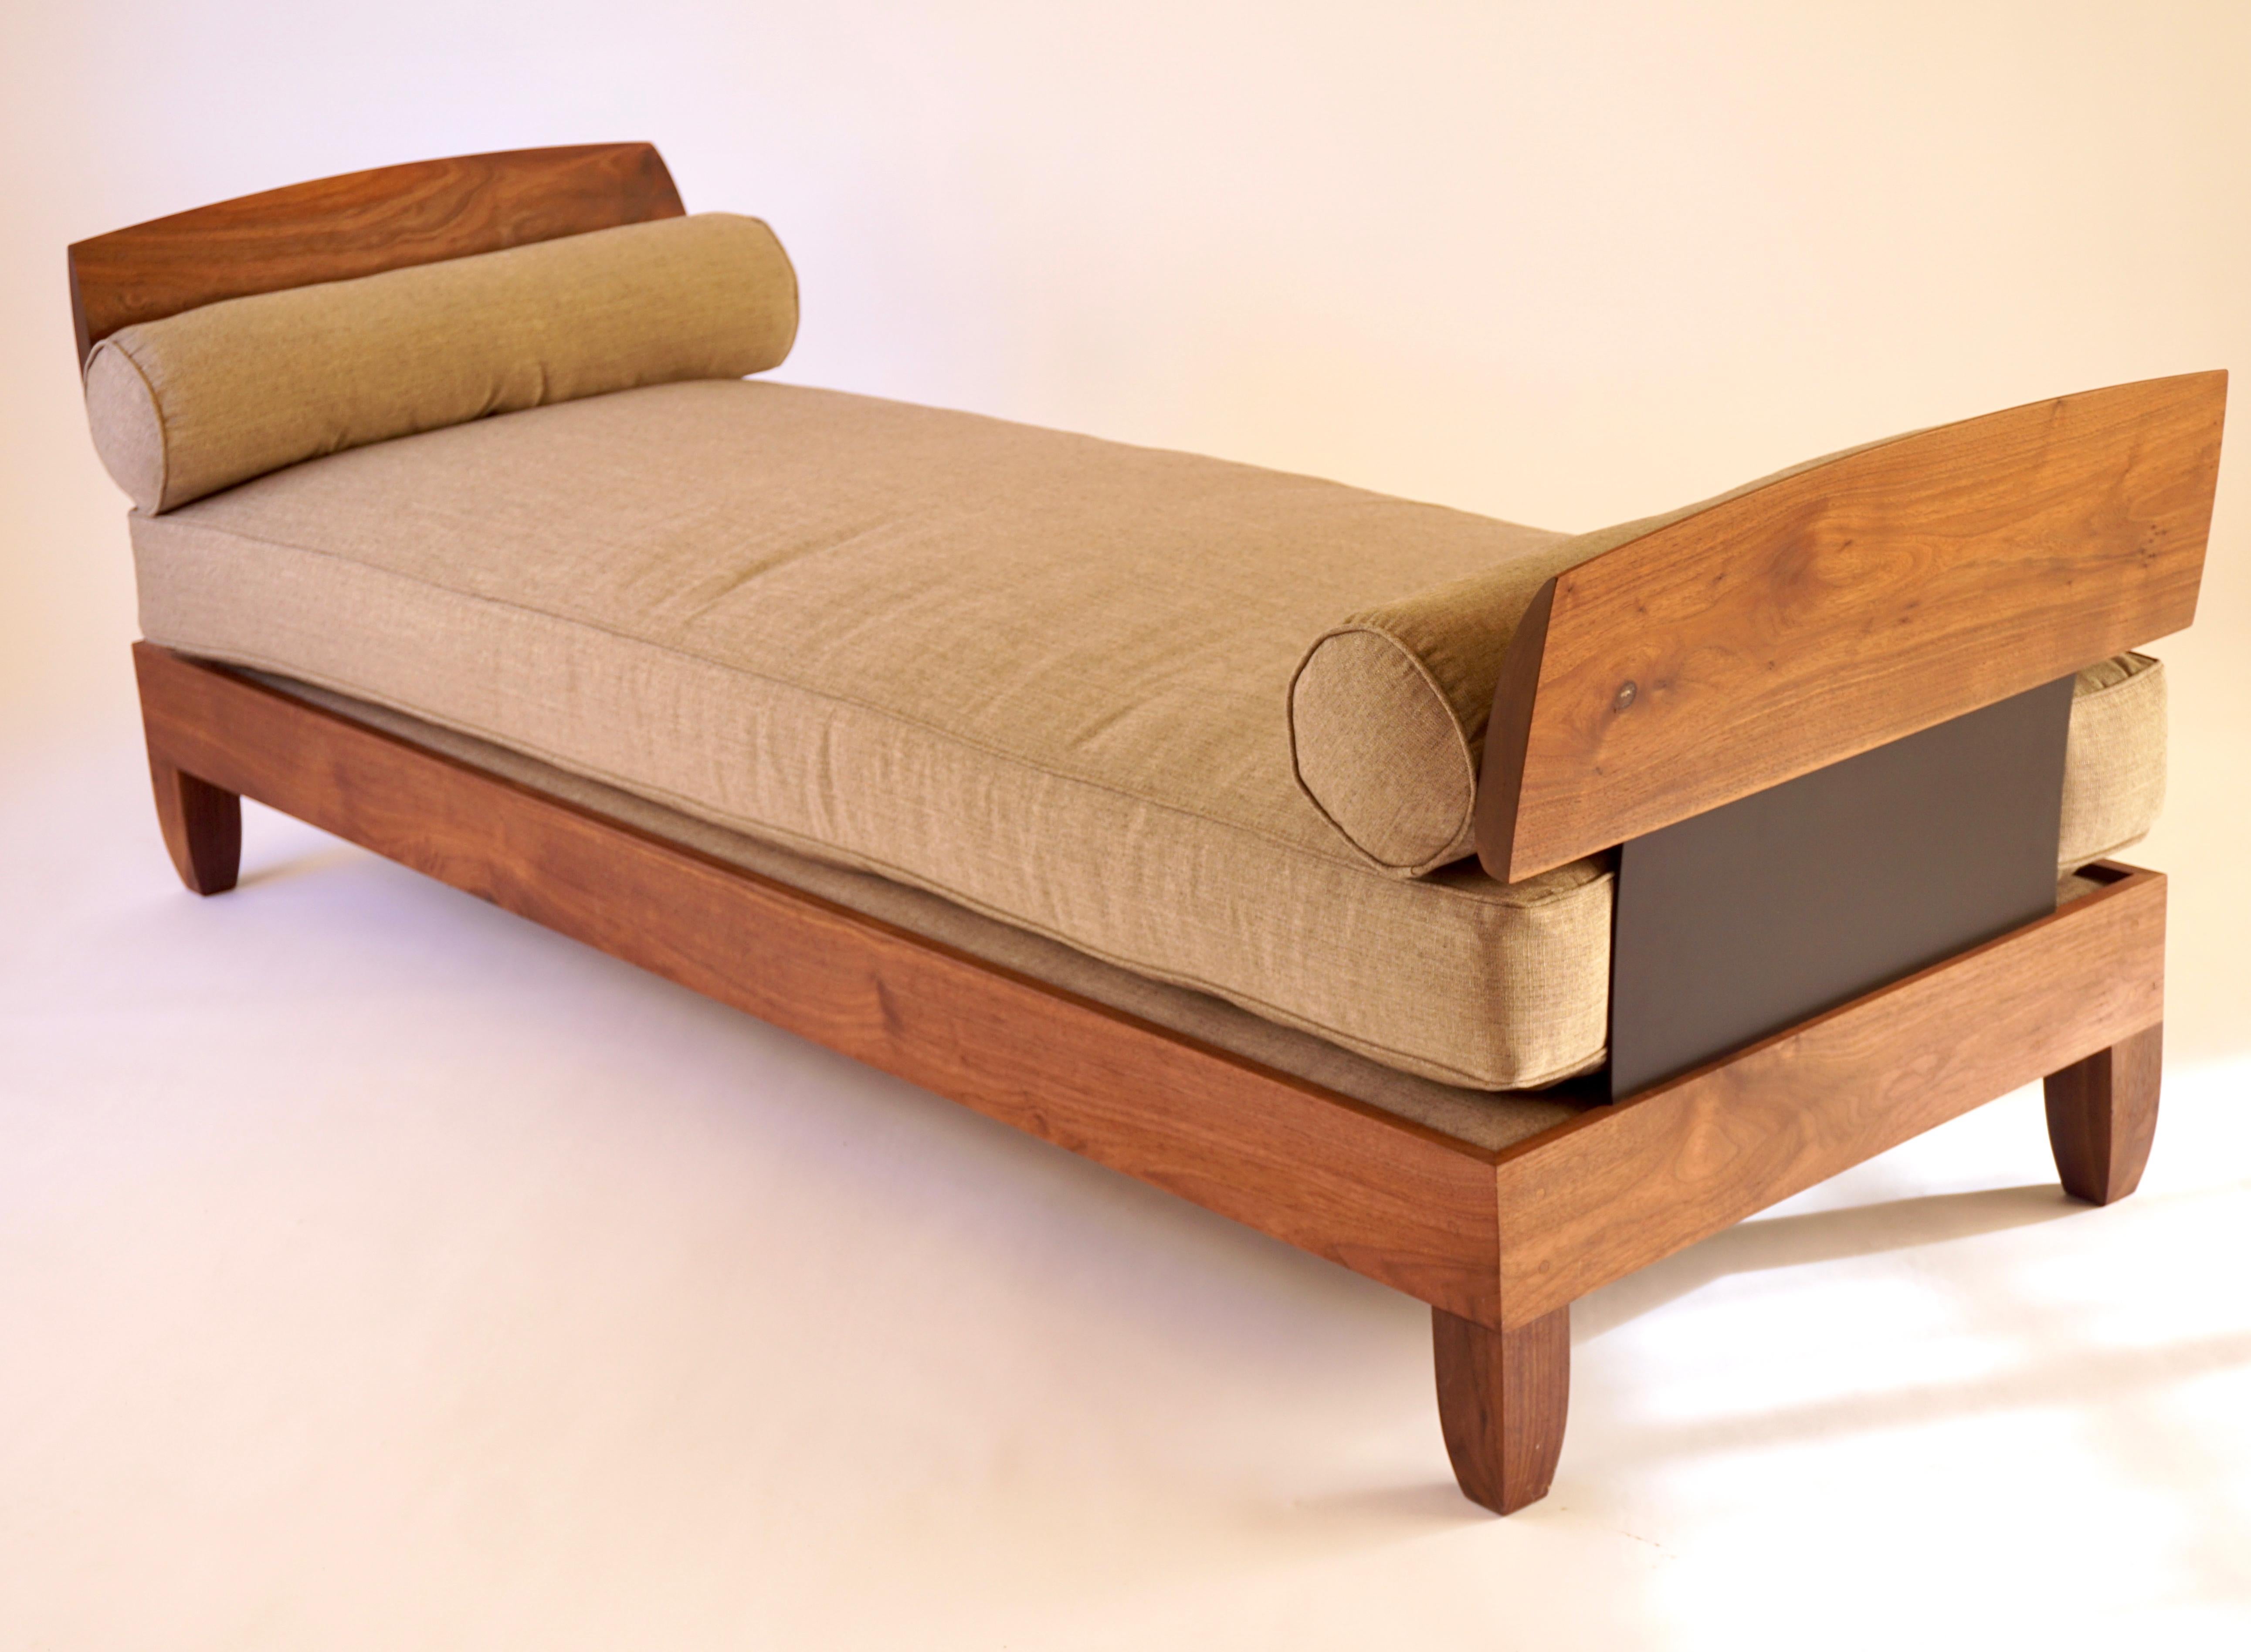 The classic Lehrecke daybed was designed in 1996 at a time when the influences were a combination of Scandinavian and African, resulting in a primitive, yet highly refined, look. This version is made from black walnut with blackened aluminum side